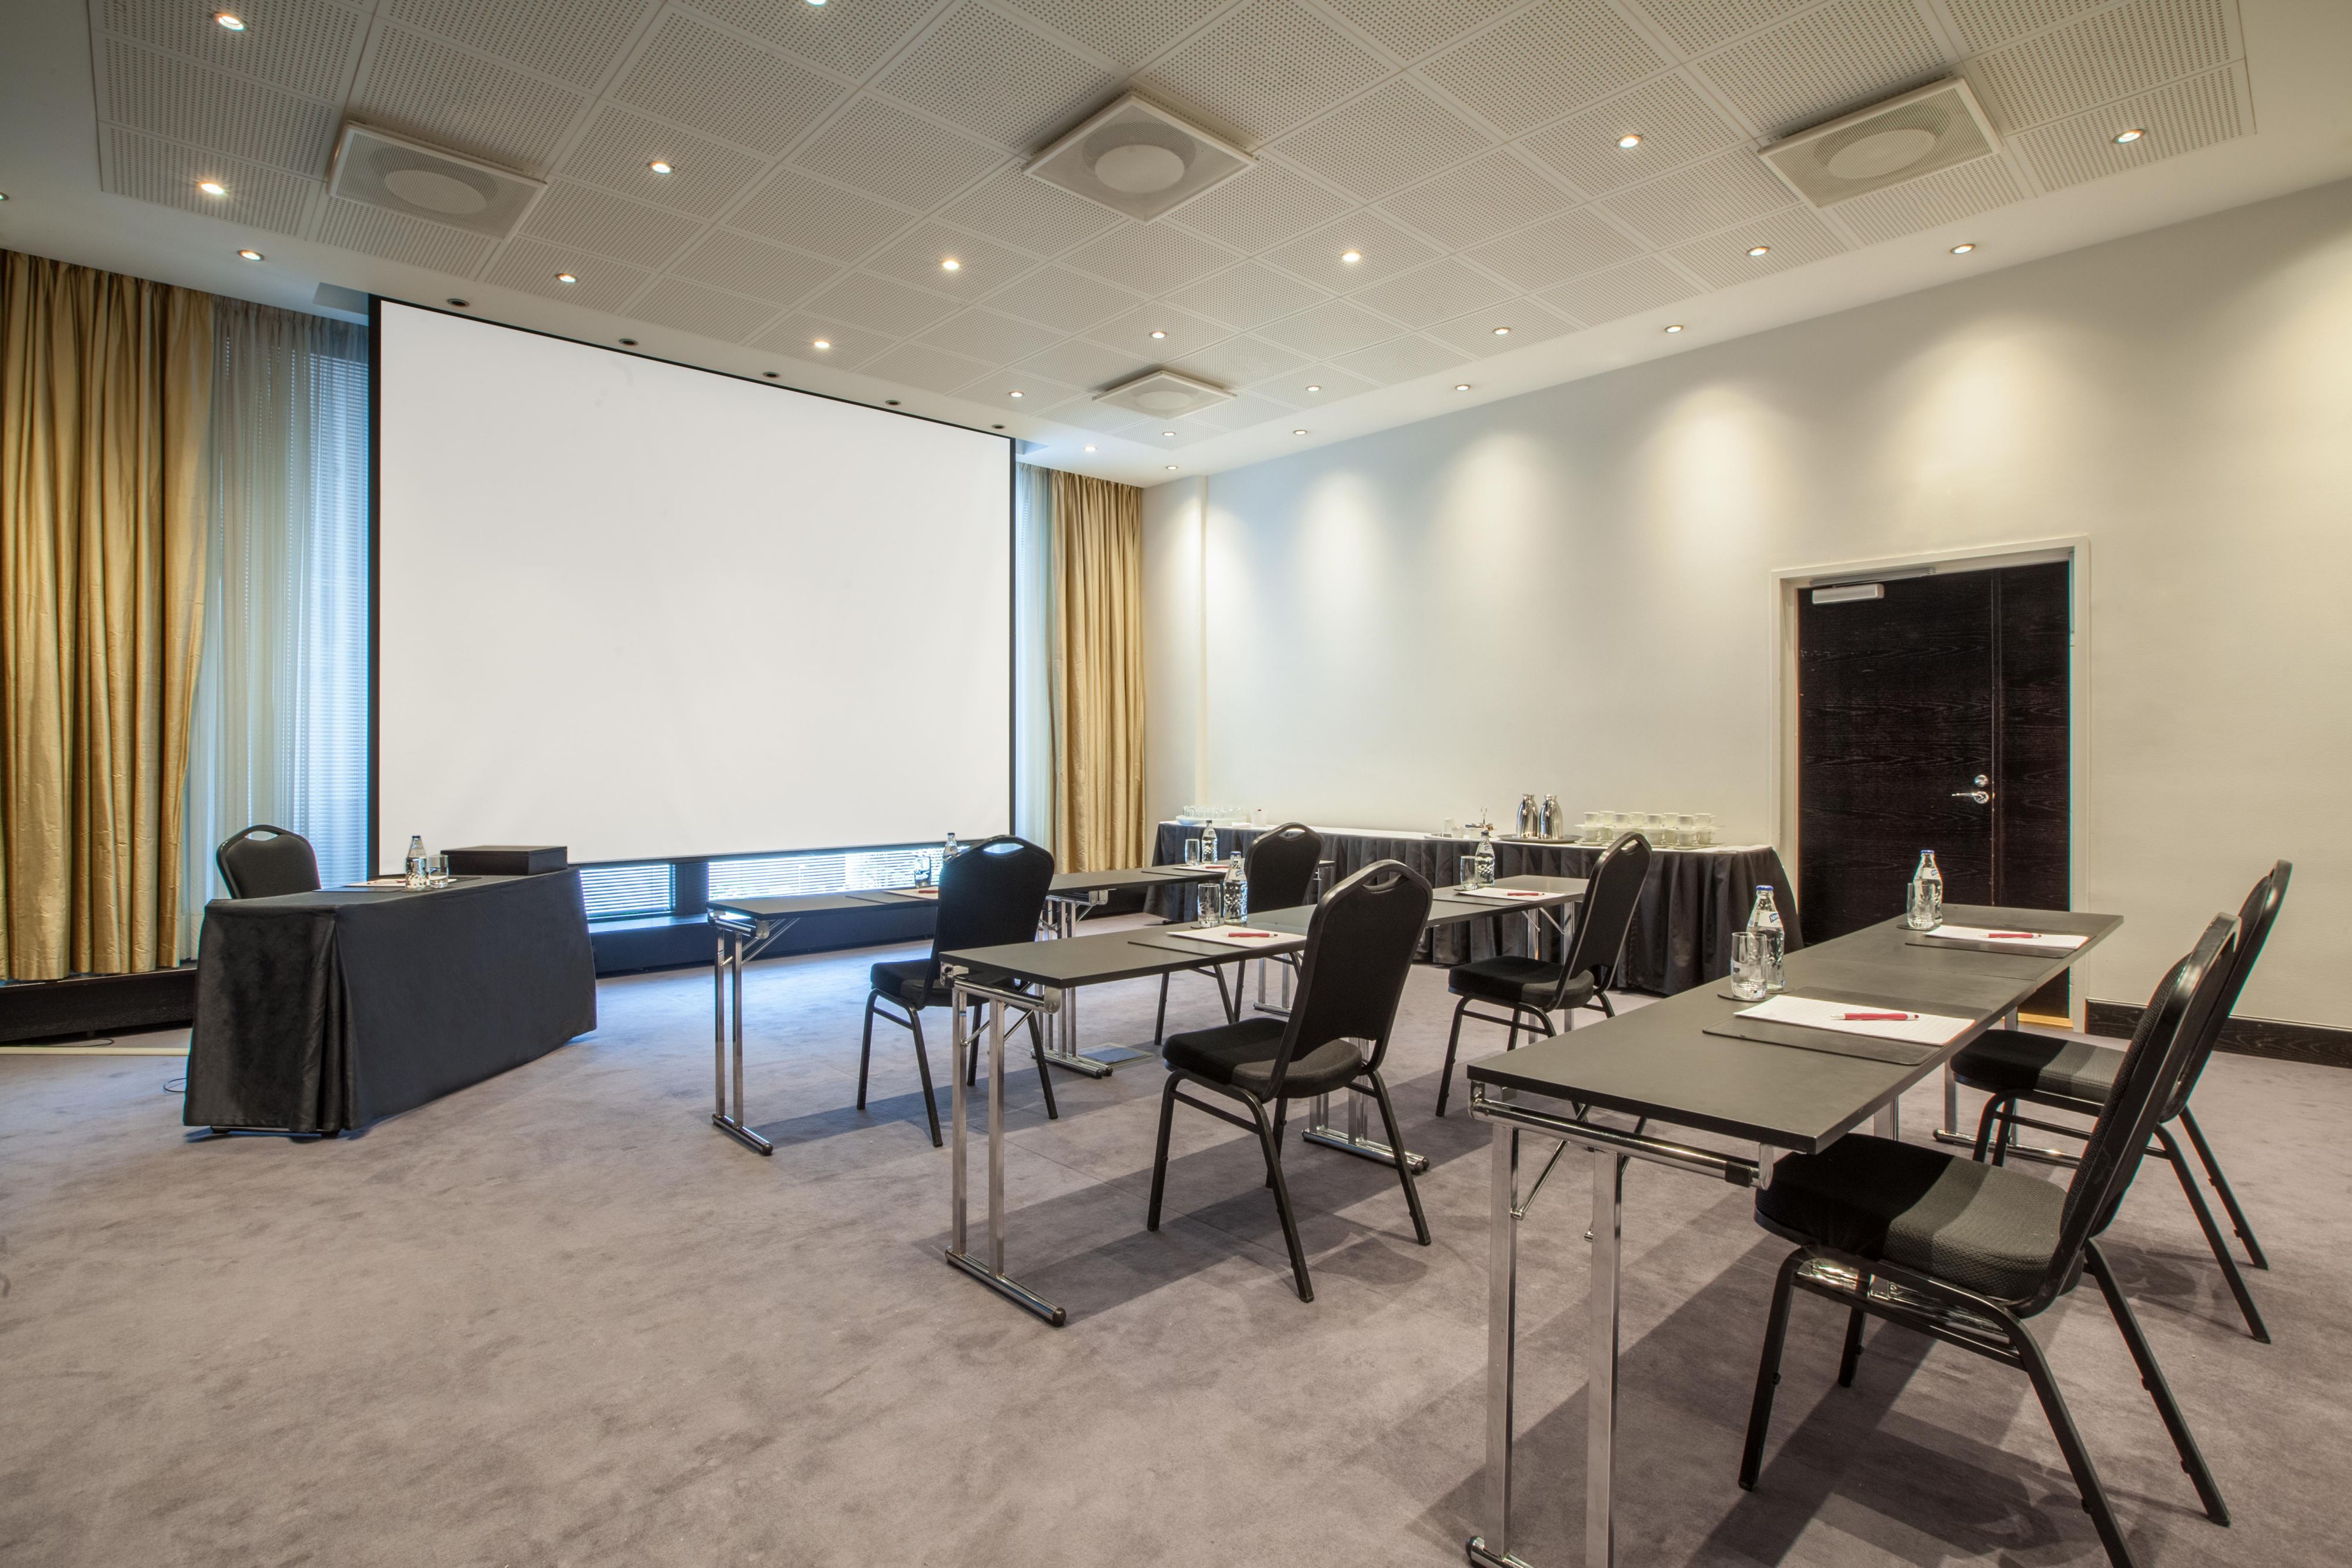 Meeting room 10 with 50m2 space is for up to 60 people